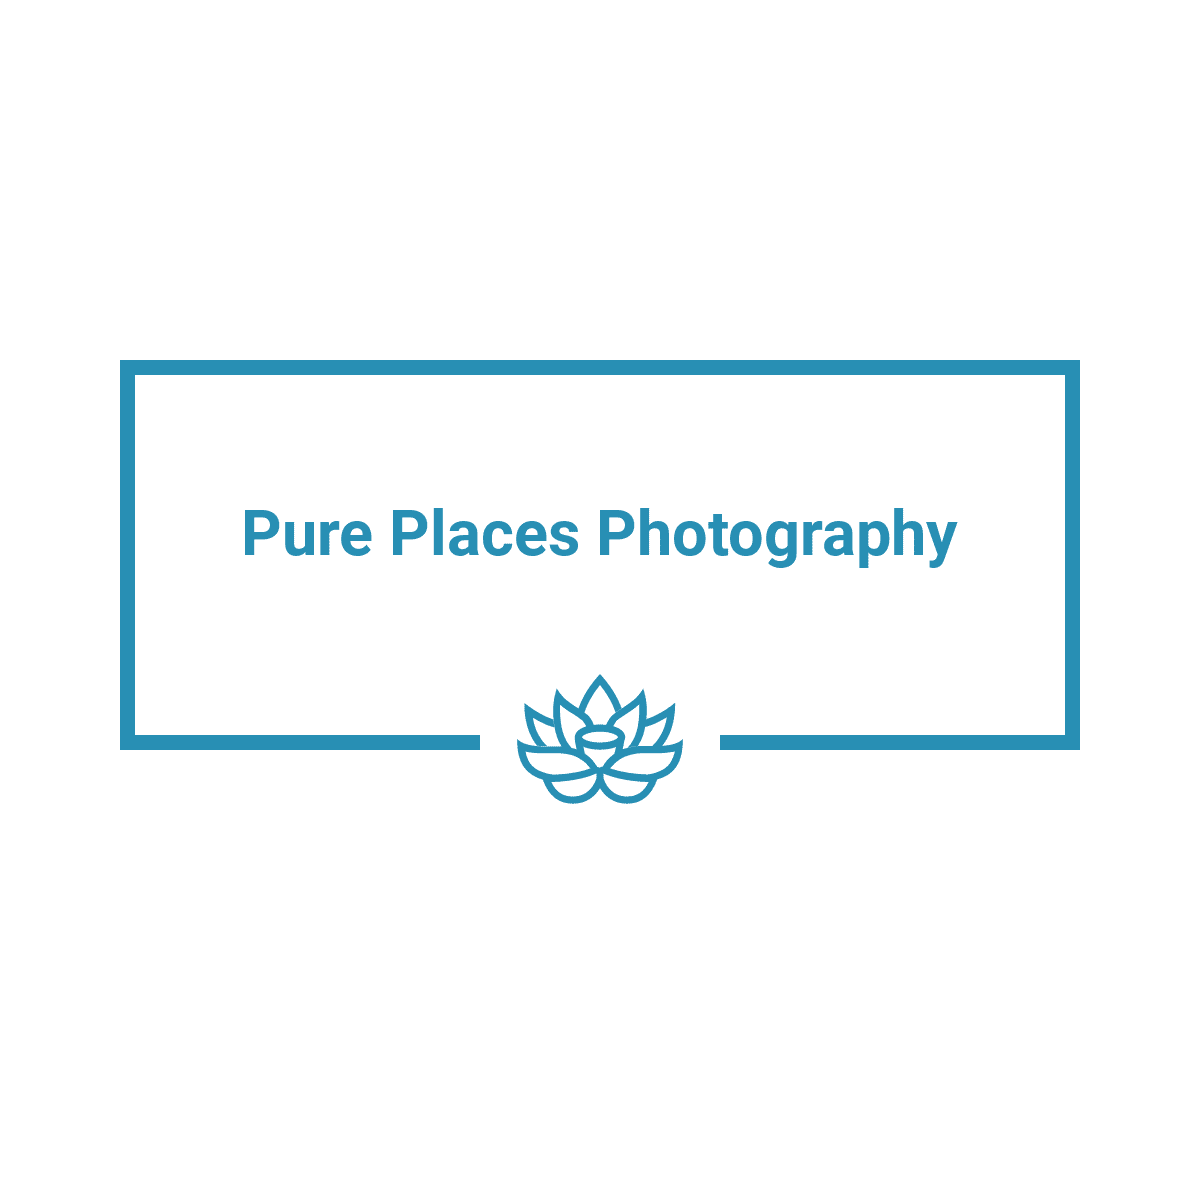 Pure Places Photography